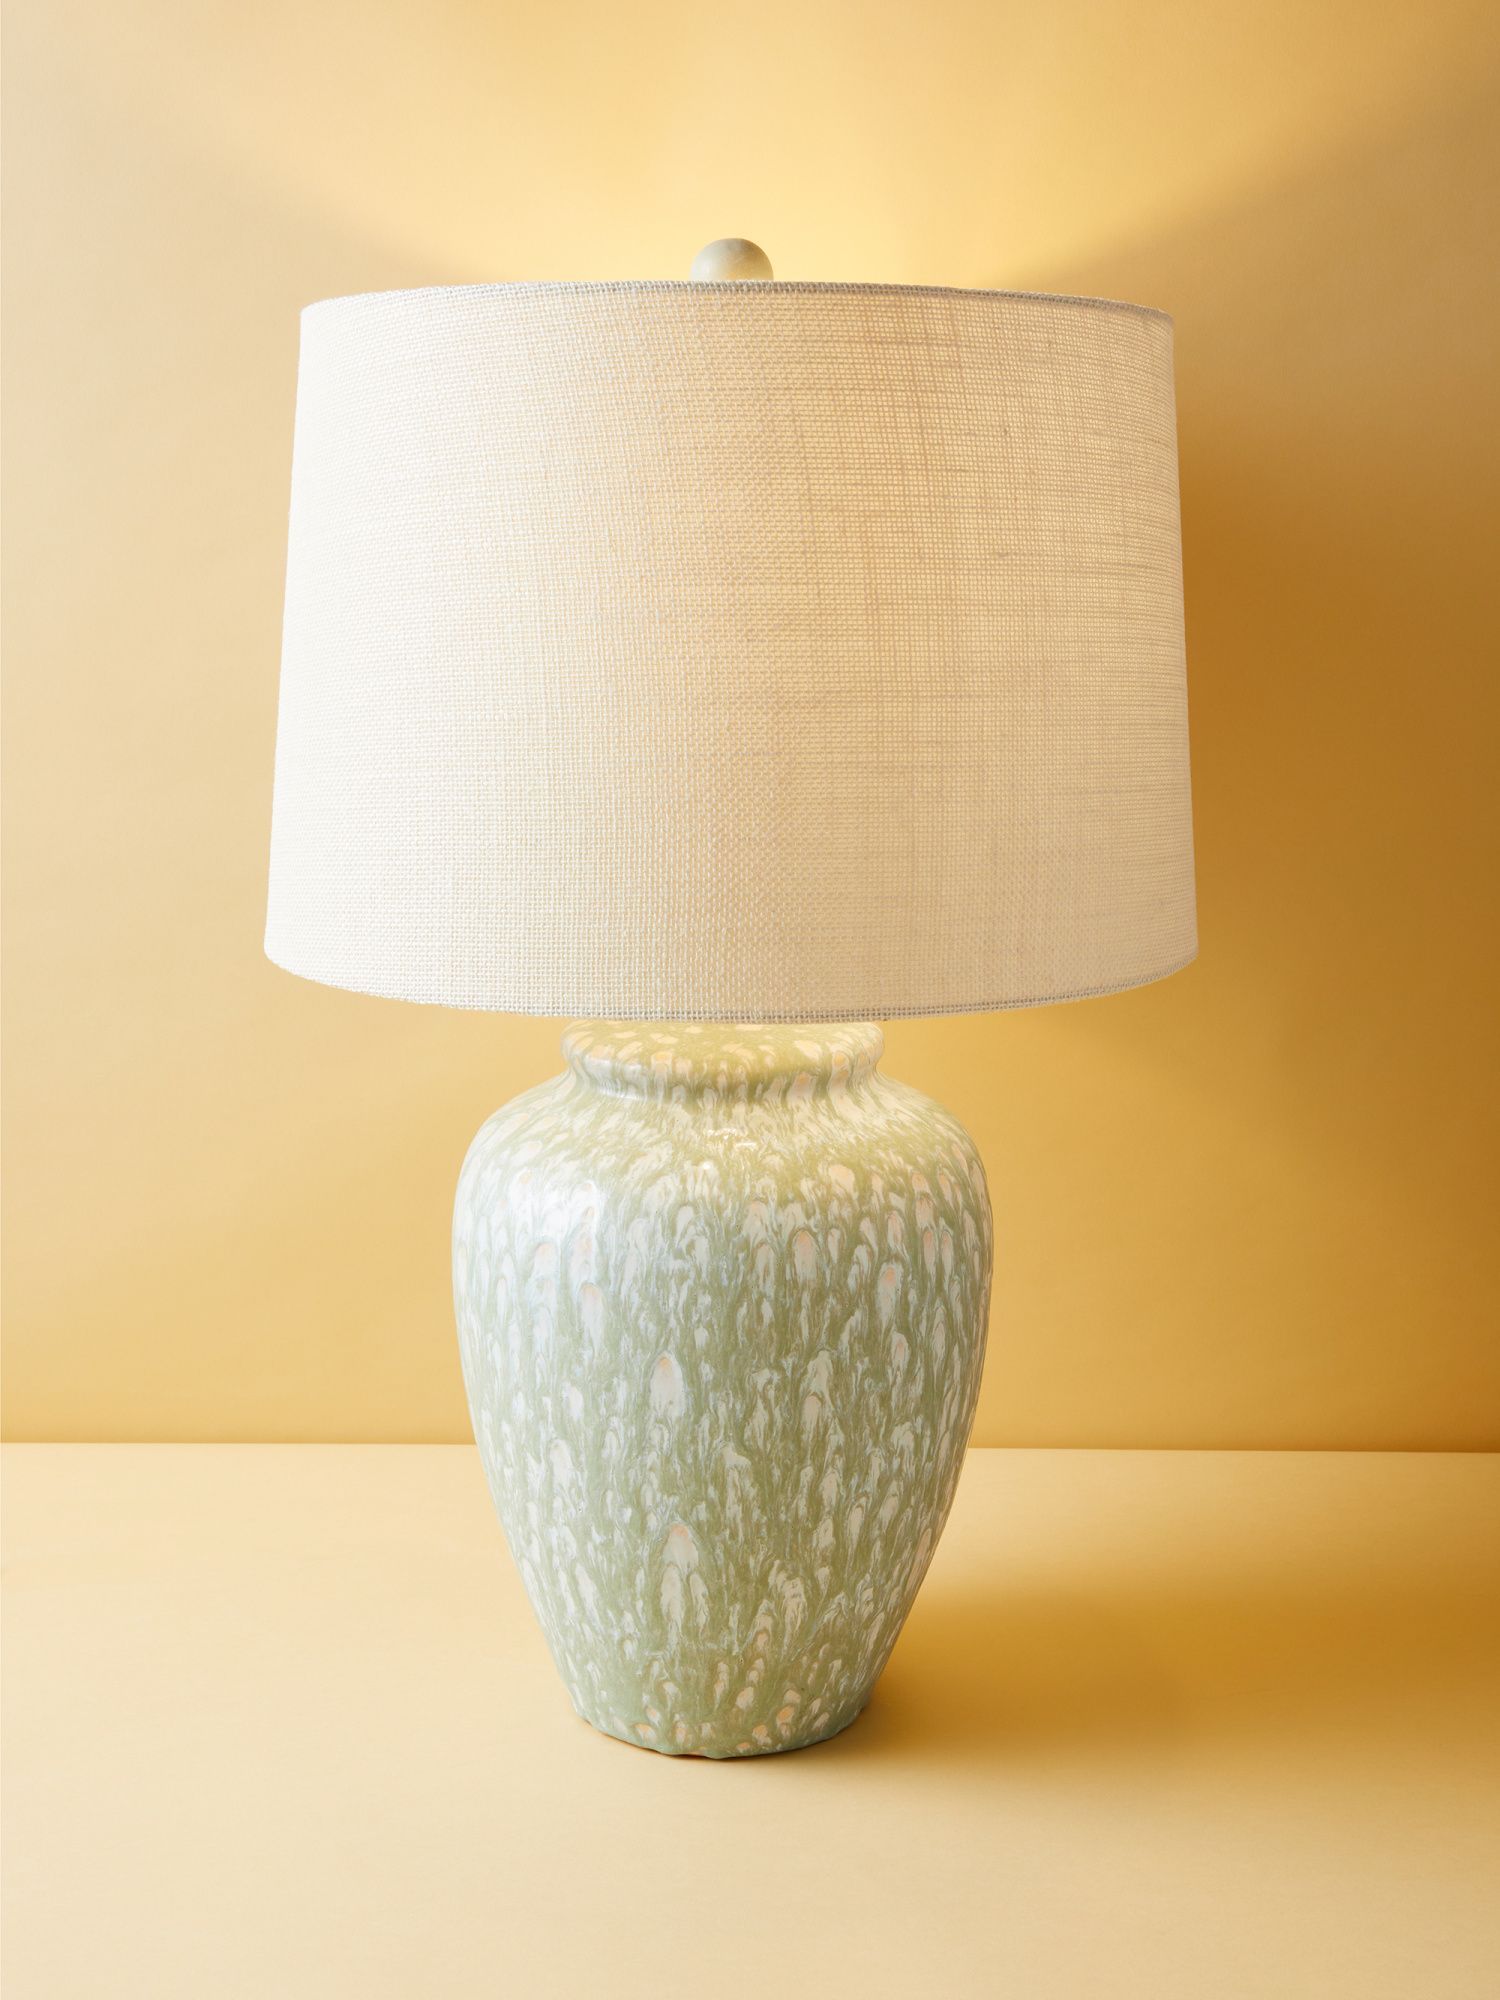 27in Ceramic Crackle Drip Finish Table Lamp | Table Lamps | HomeGoods | HomeGoods